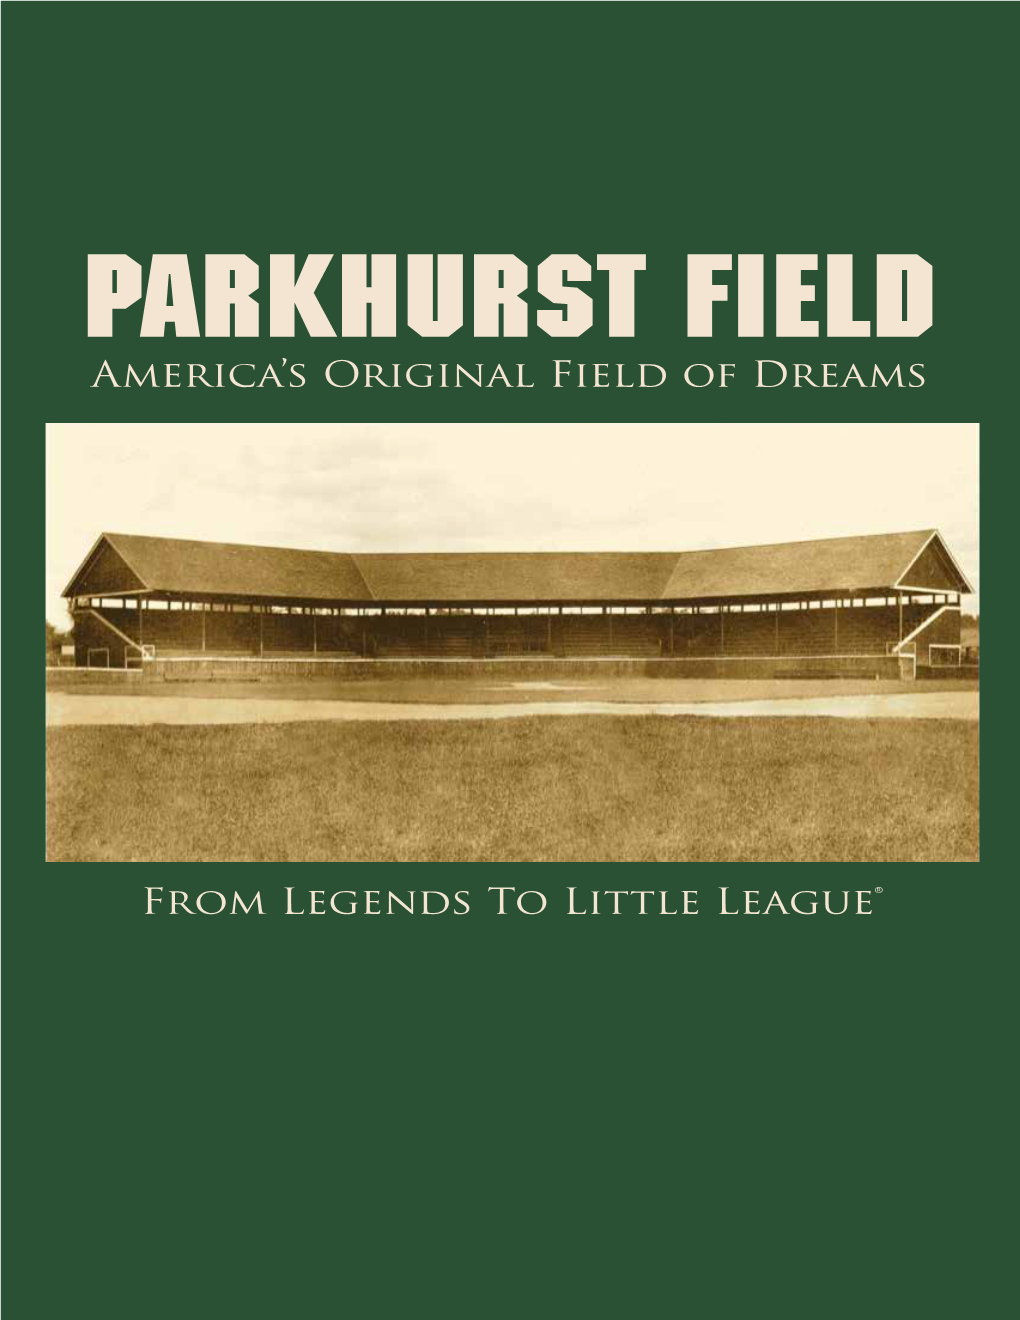 America's Original Field of Dreams from Legends to Little League®